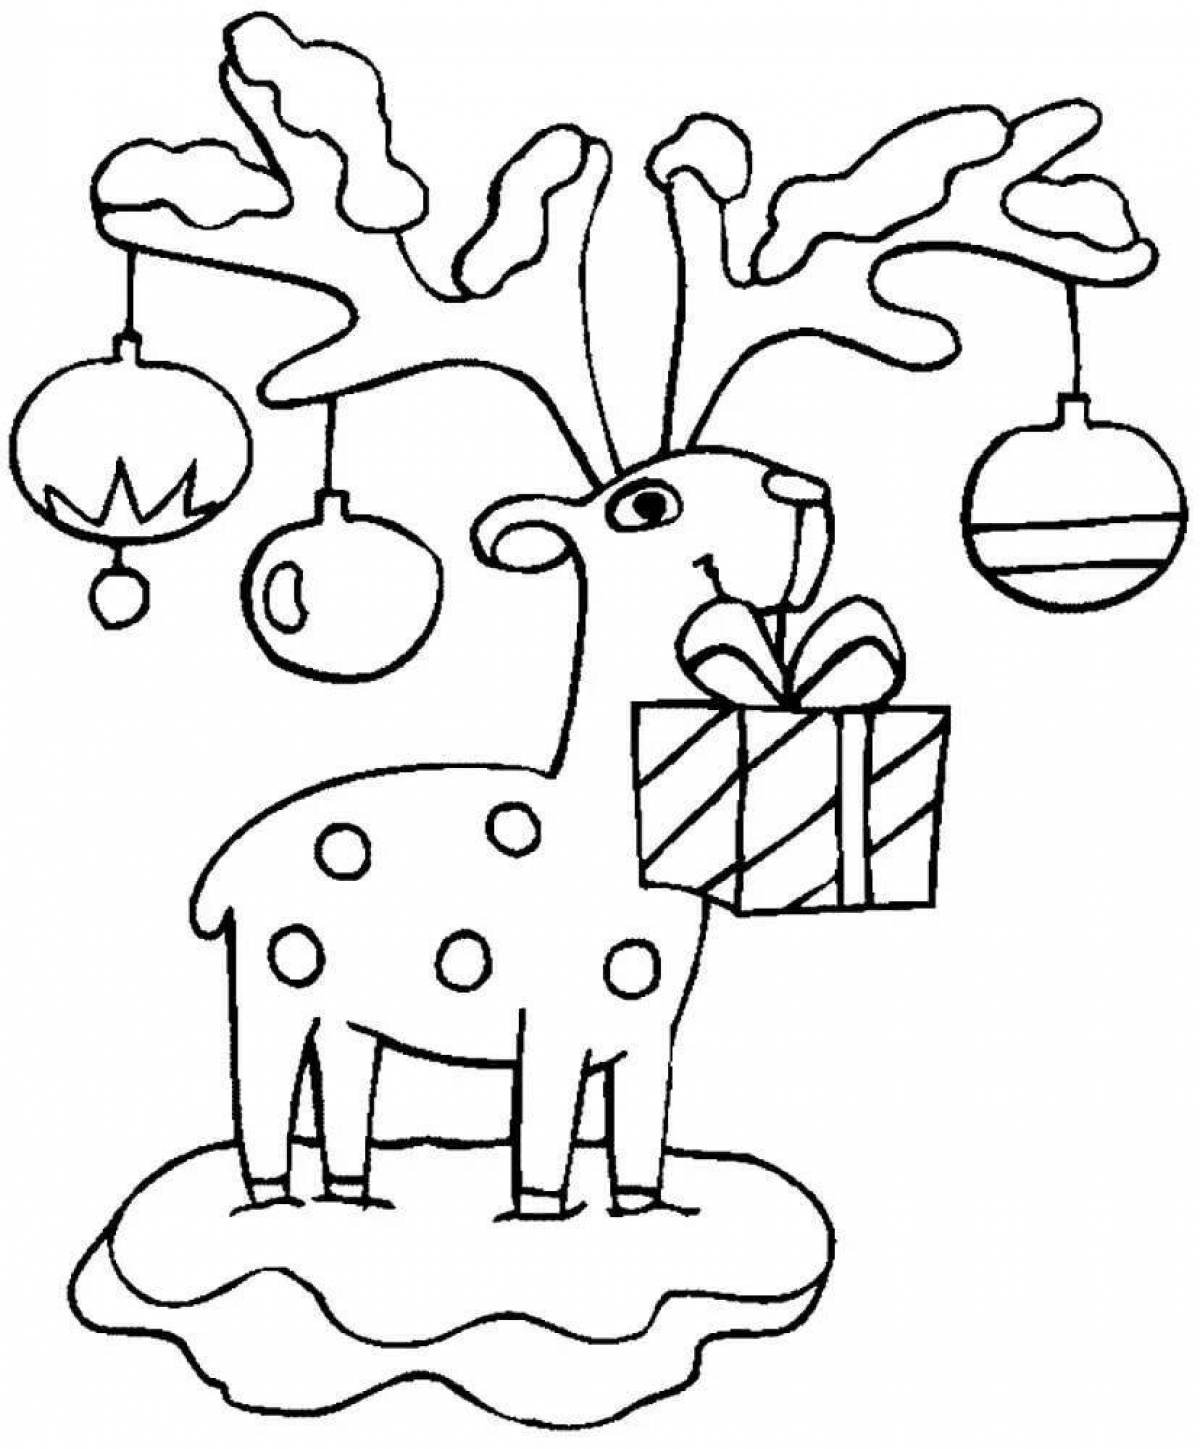 Gorgeous Christmas reindeer coloring book for kids